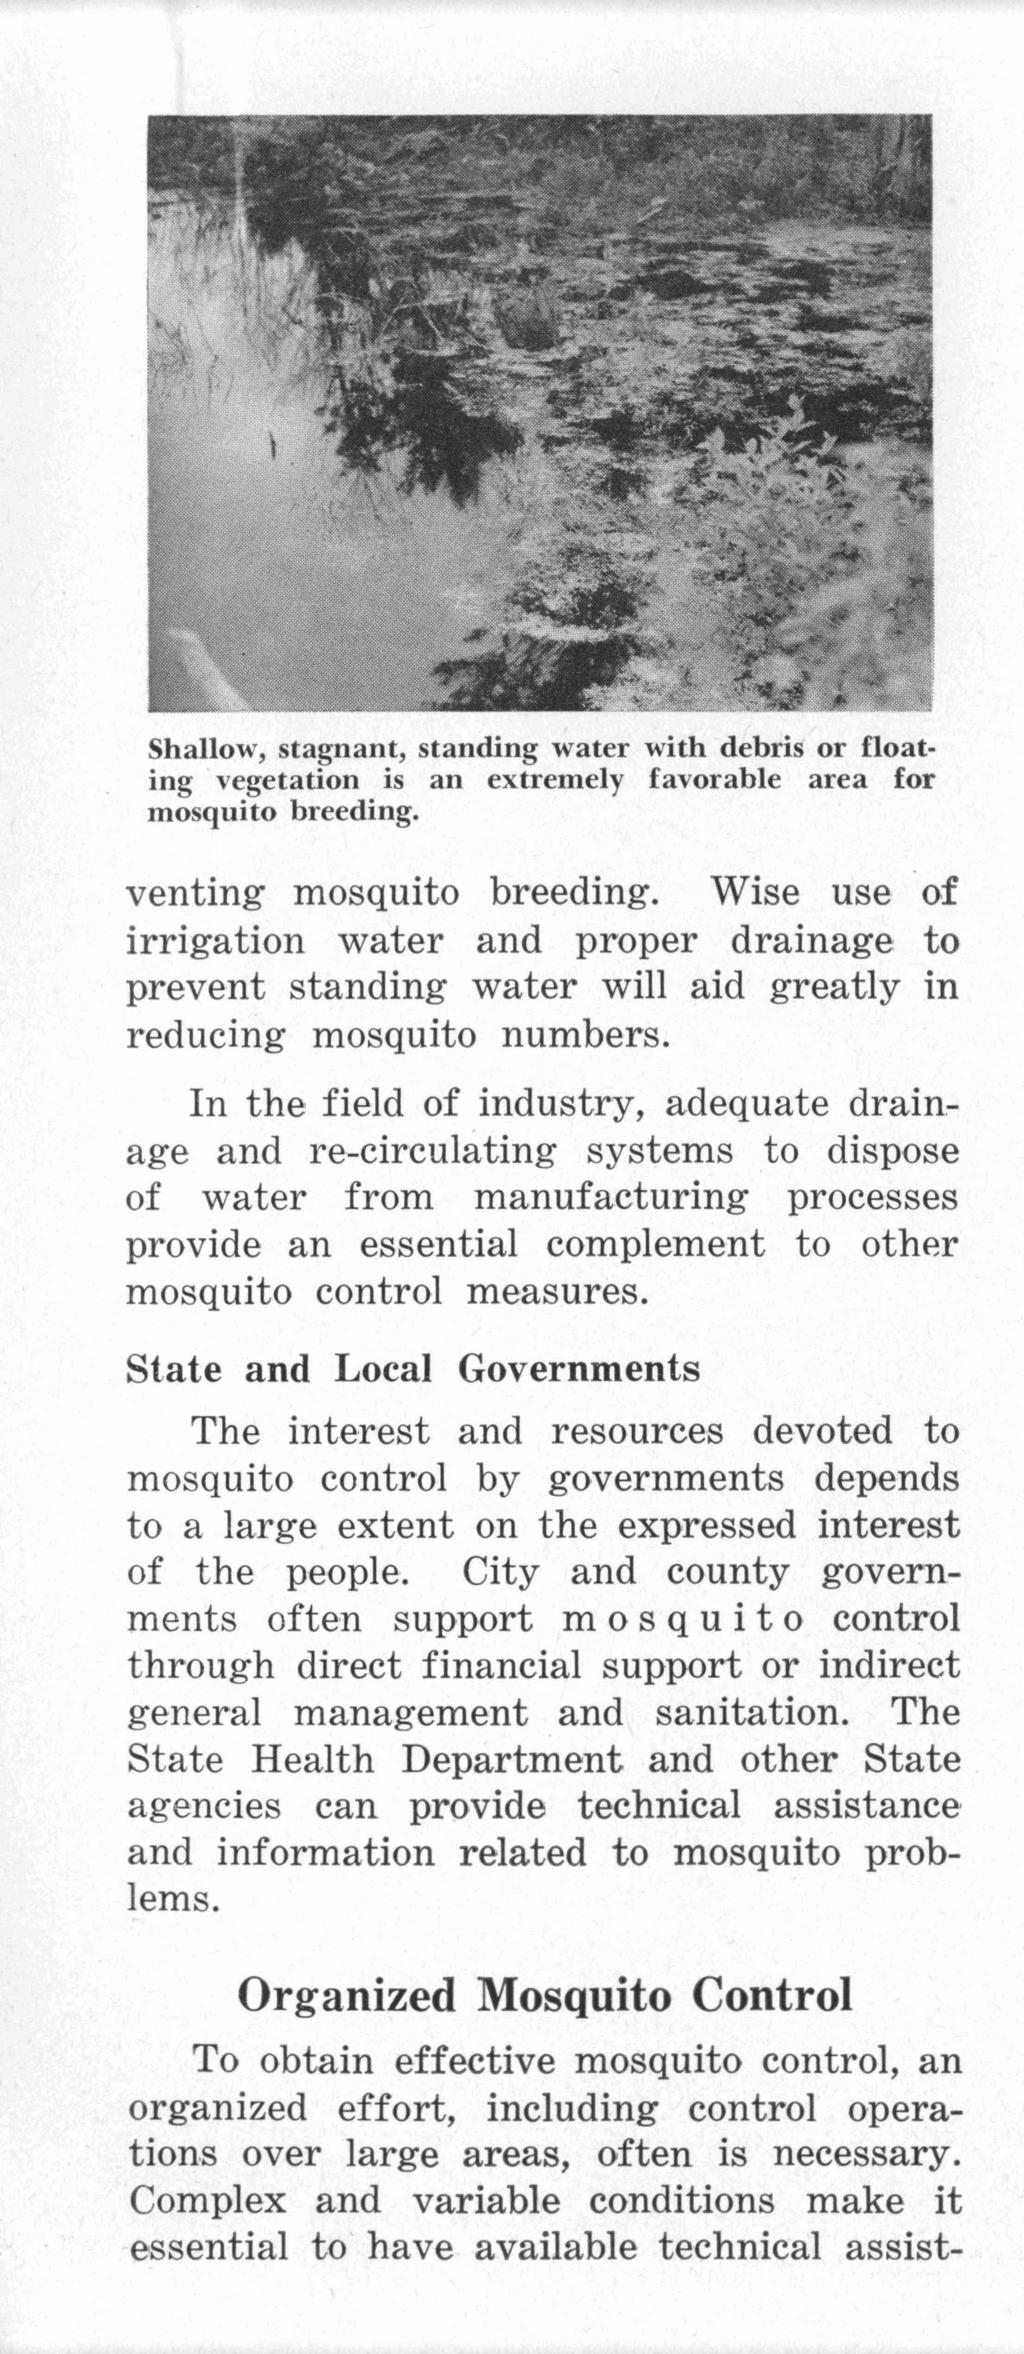 hallow, tagnant, standing water with debri or floating vegetation is an extremely favorable area for mosquito breeding. venting mosquito breeding. Wise use.